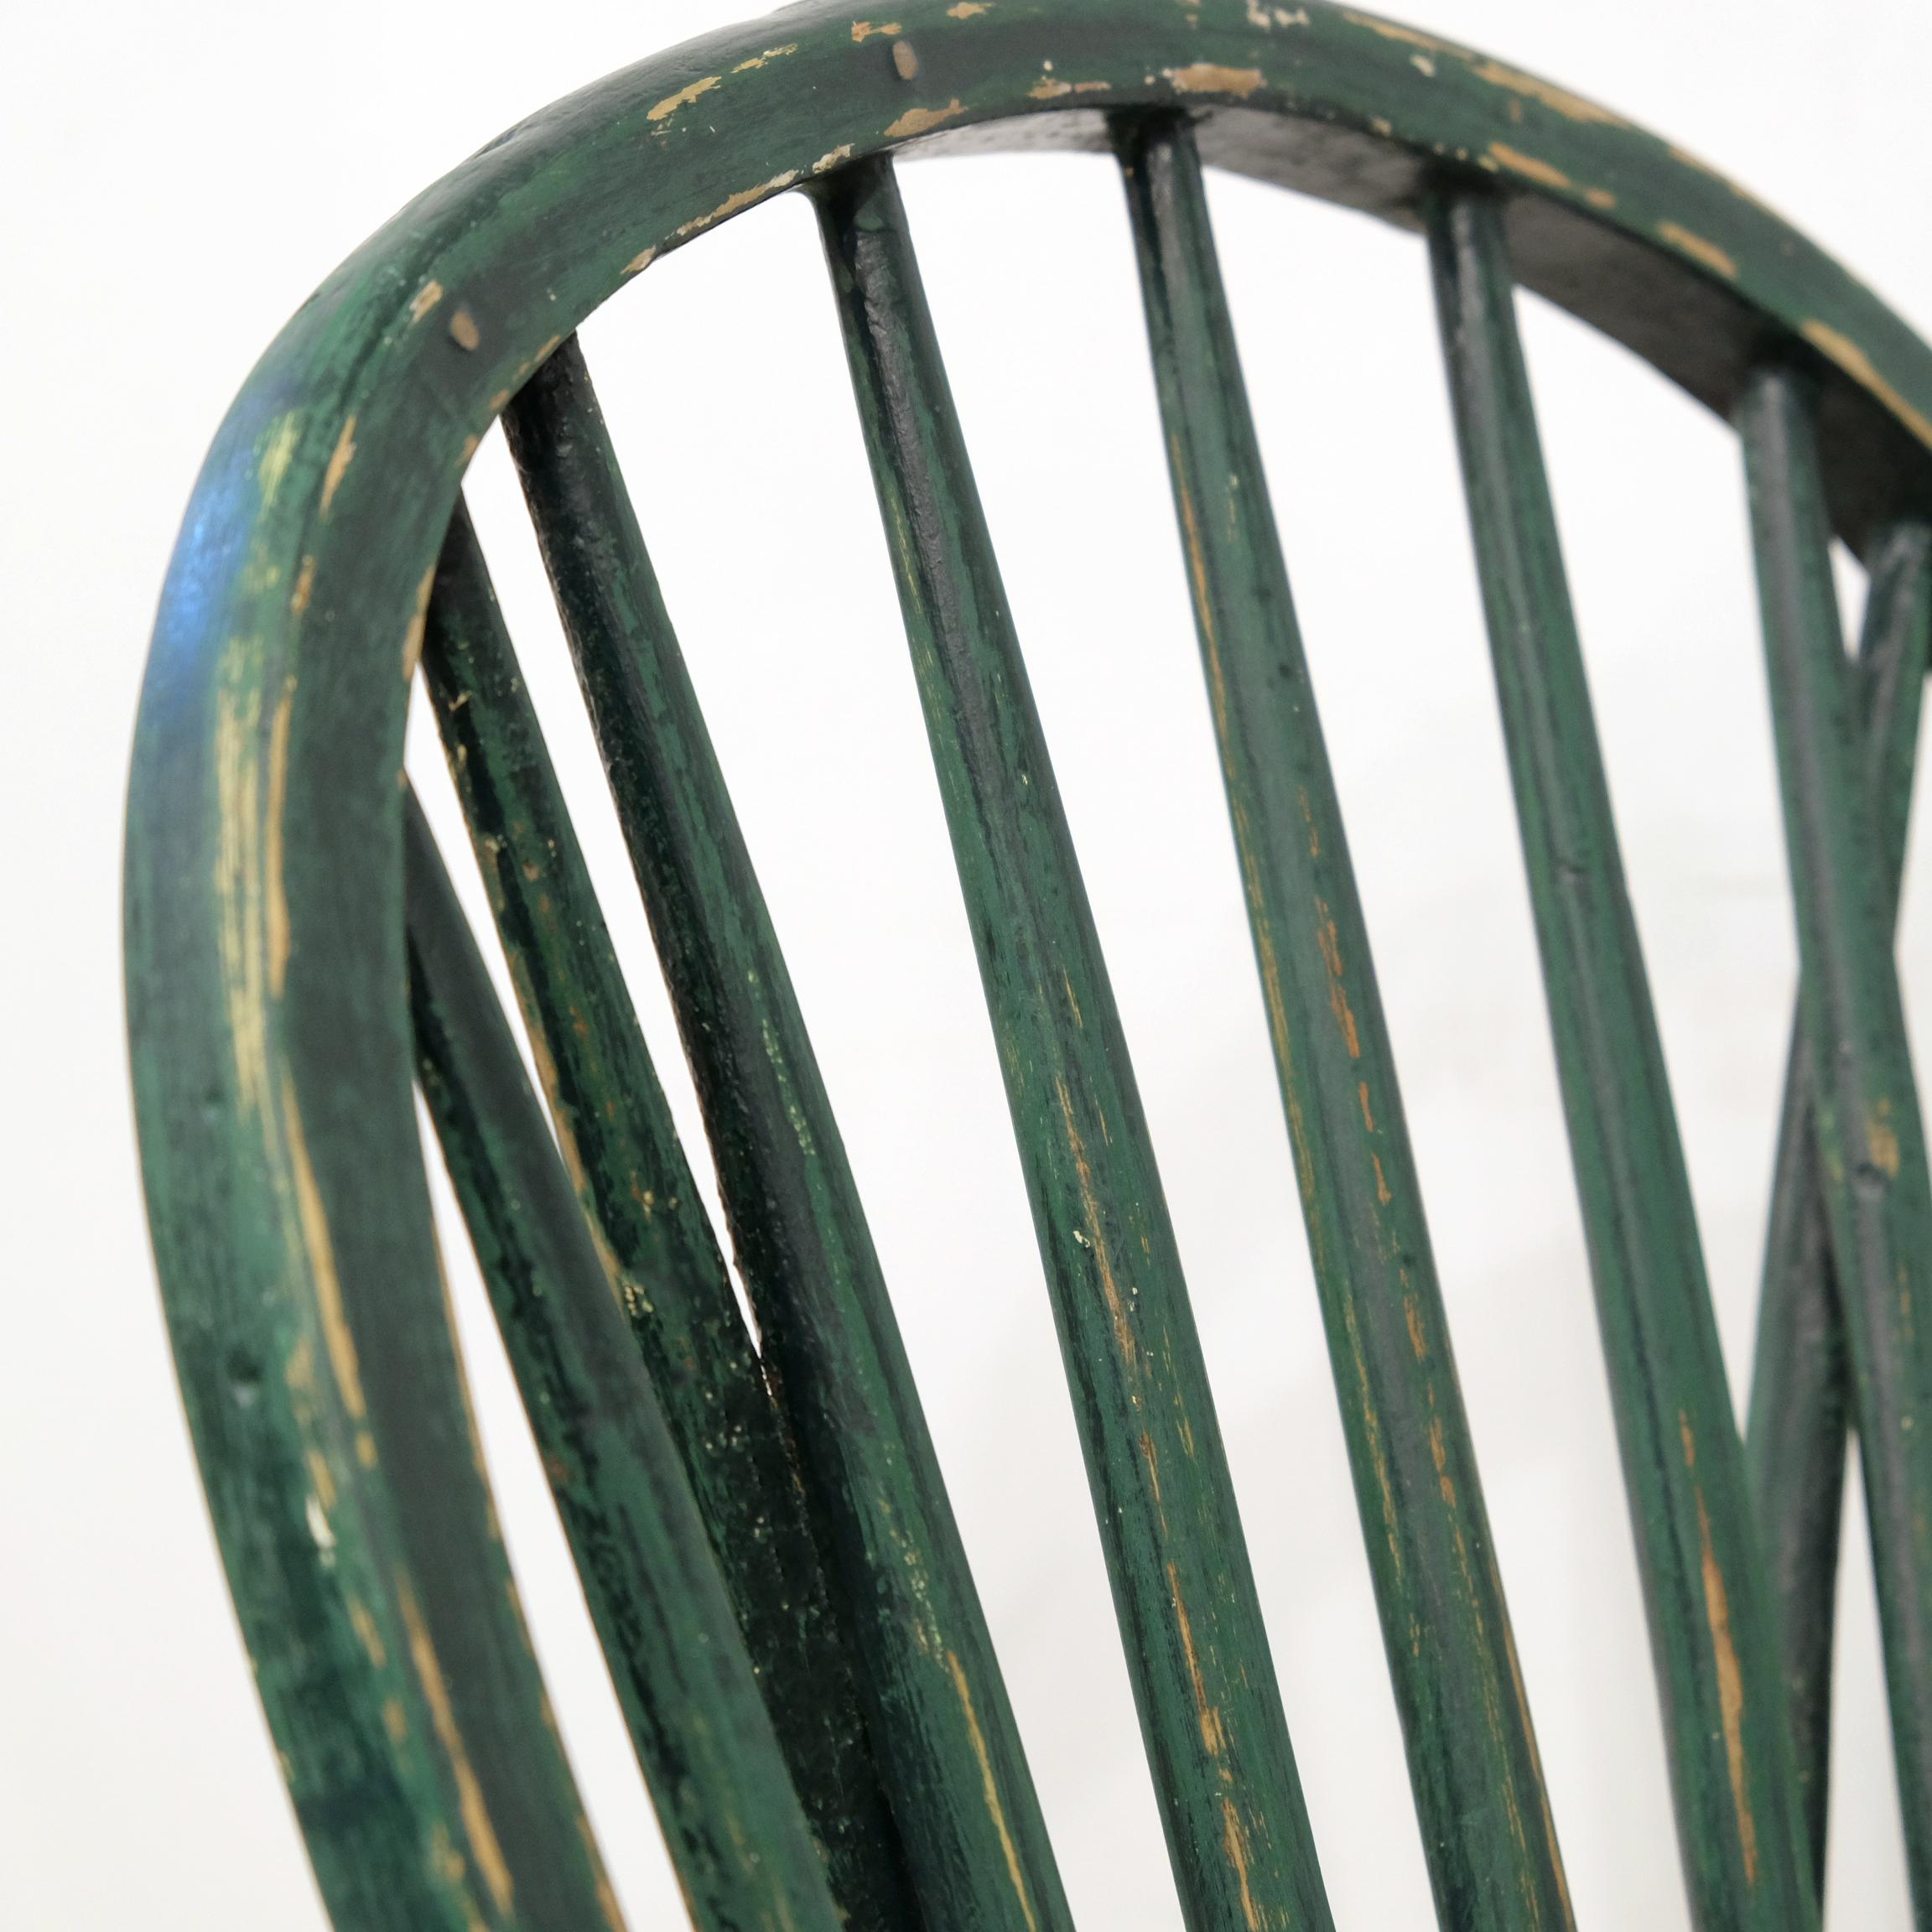 British Yealmpton Side Chair, Old Green Paint, English, West Country, 1820s, Country